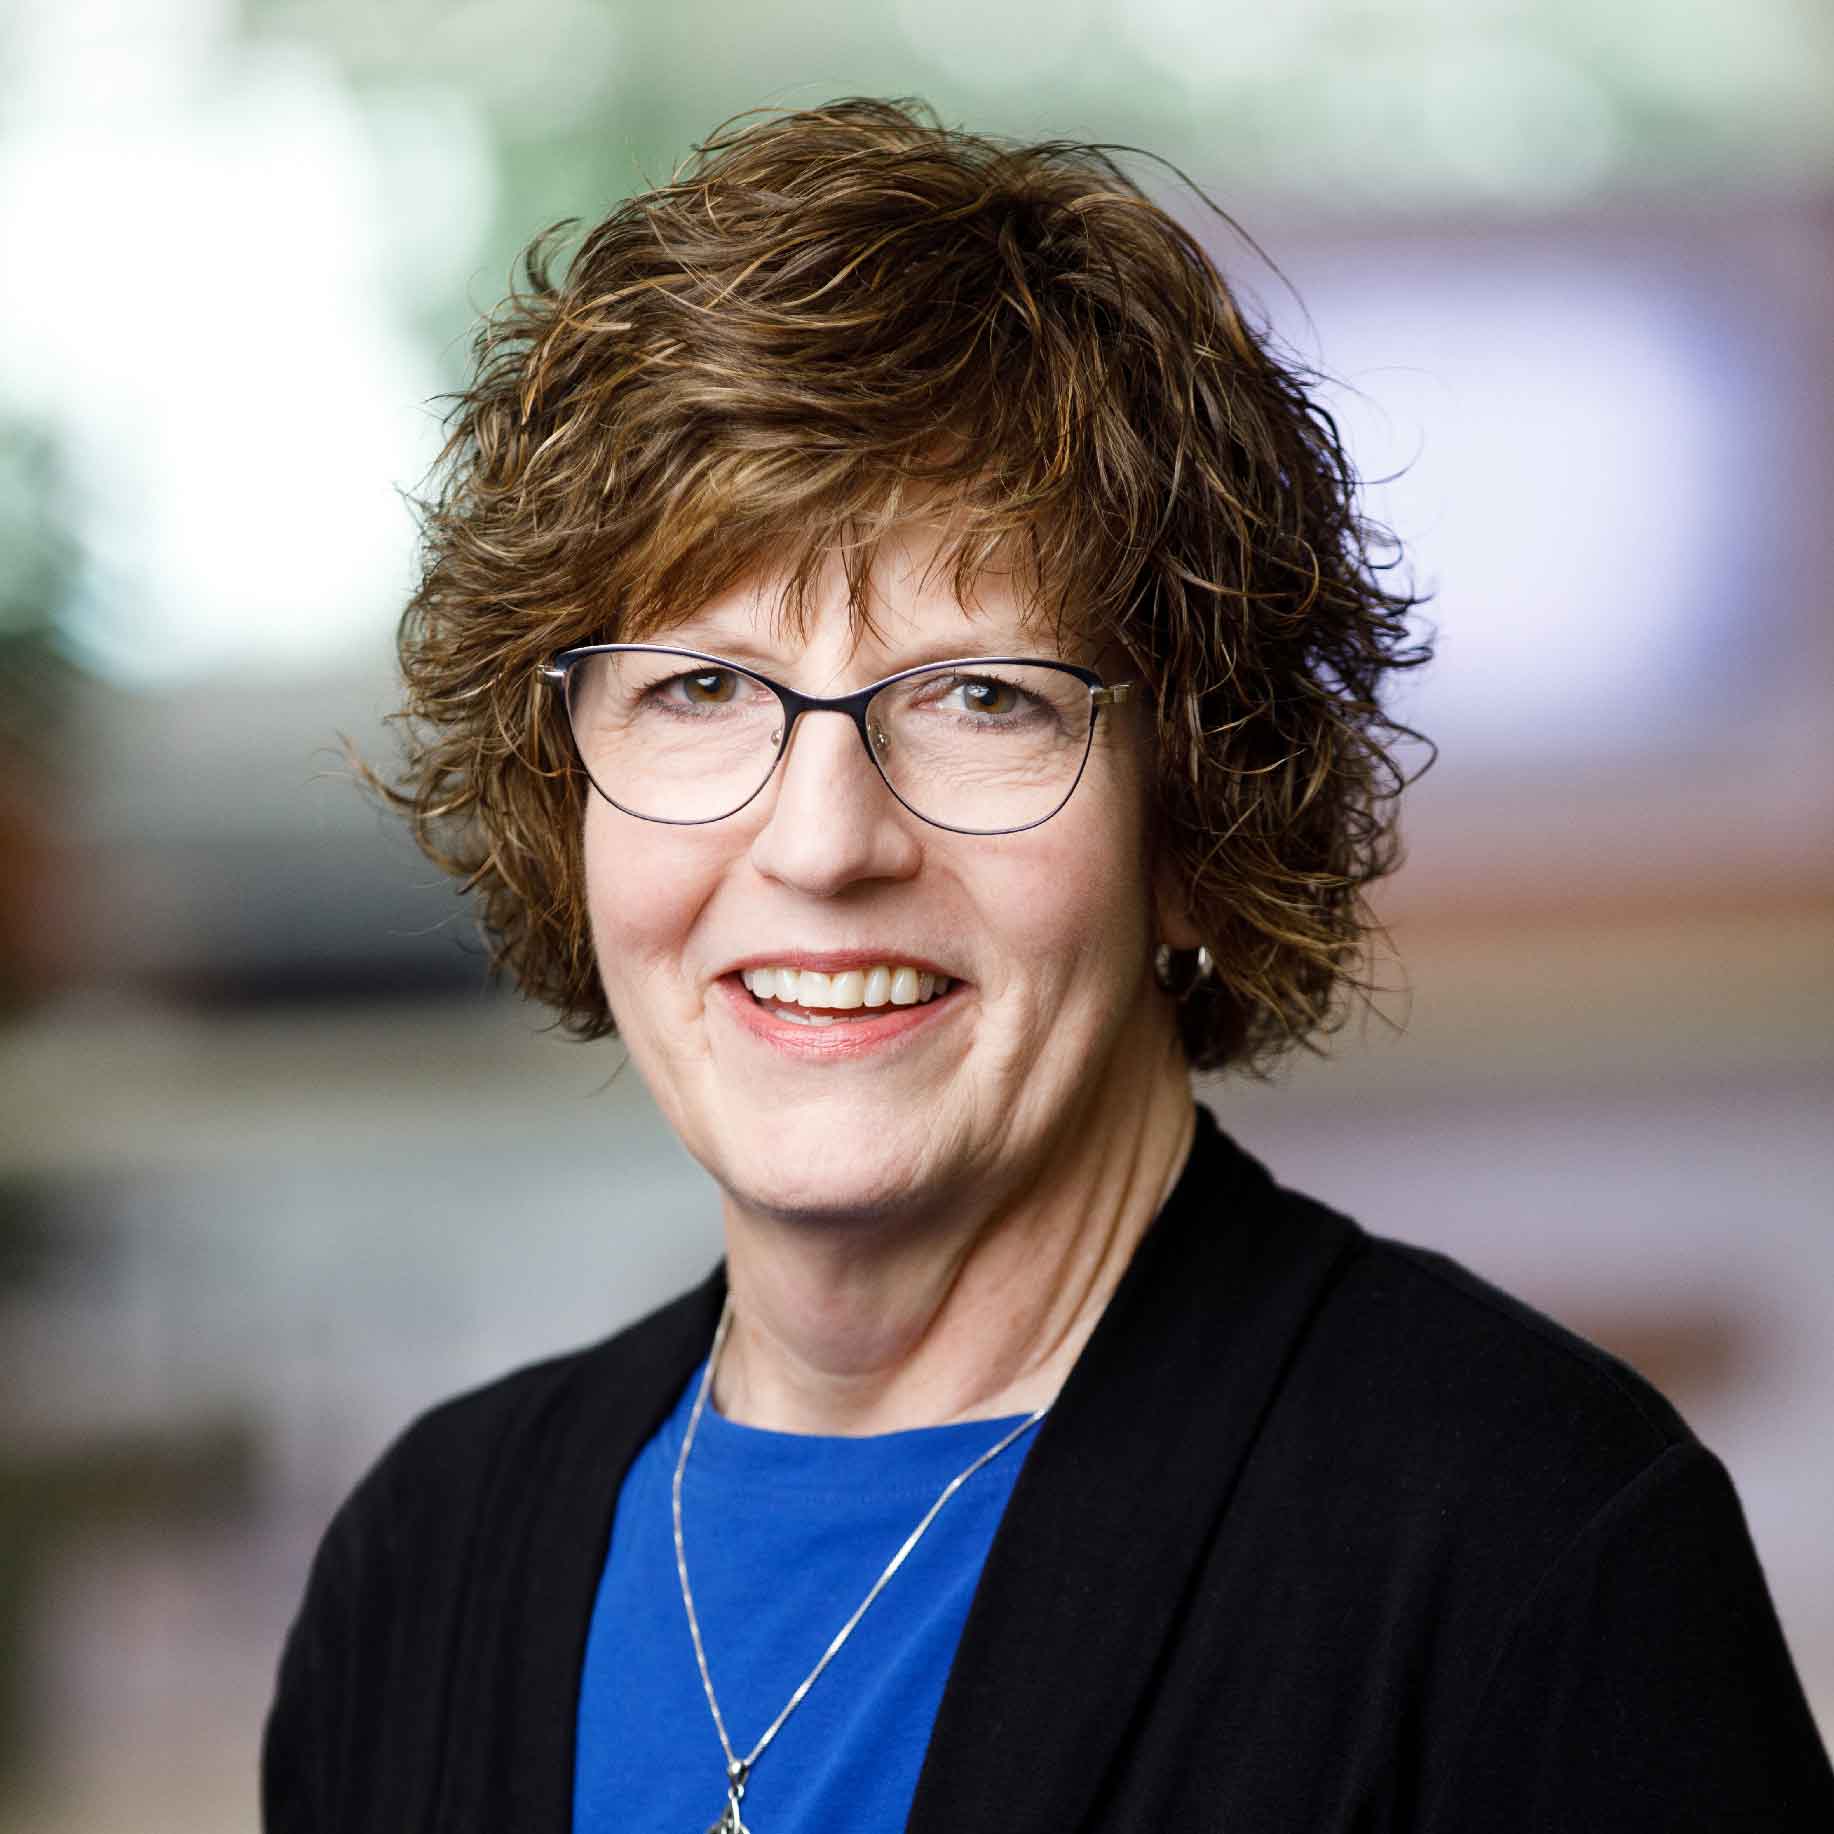 Pam Ryser, Assistant Vice President & Trust Officer